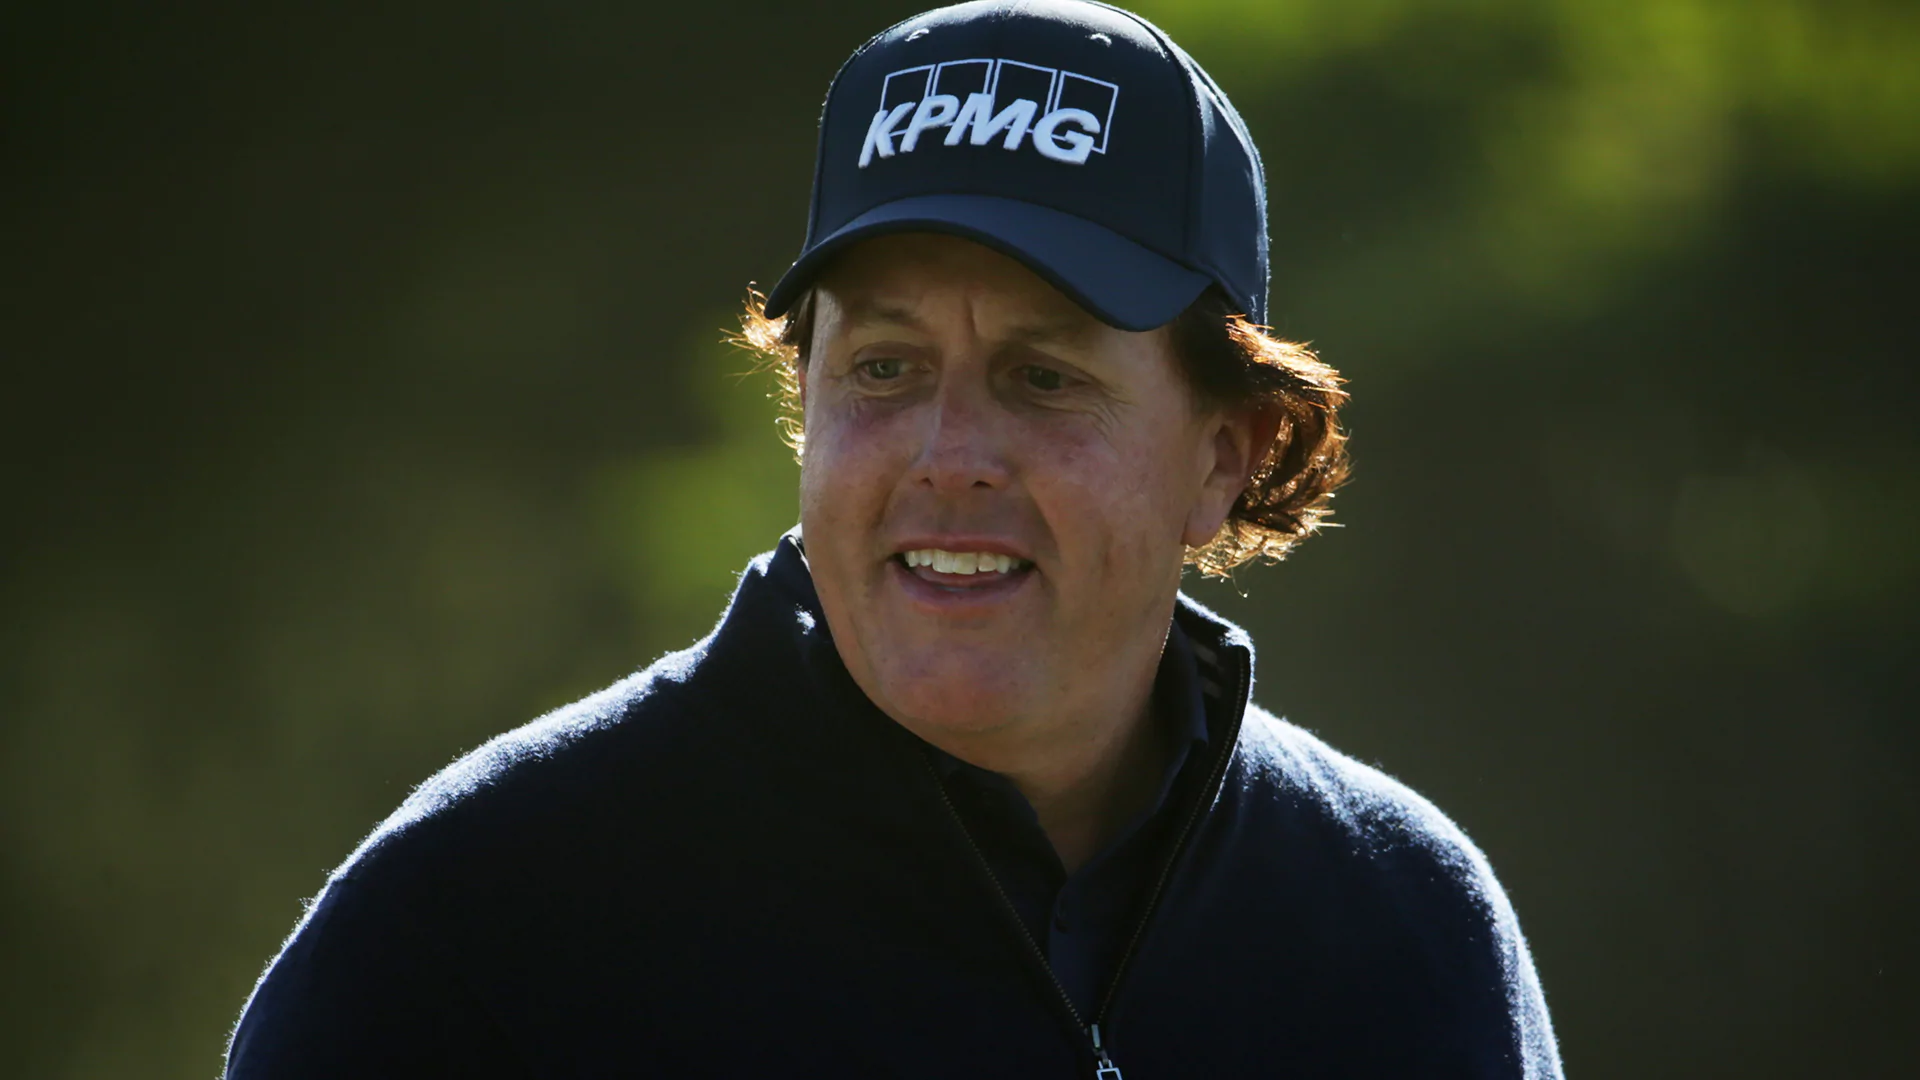 Mickelson trails by 1 after opening round at AT&T